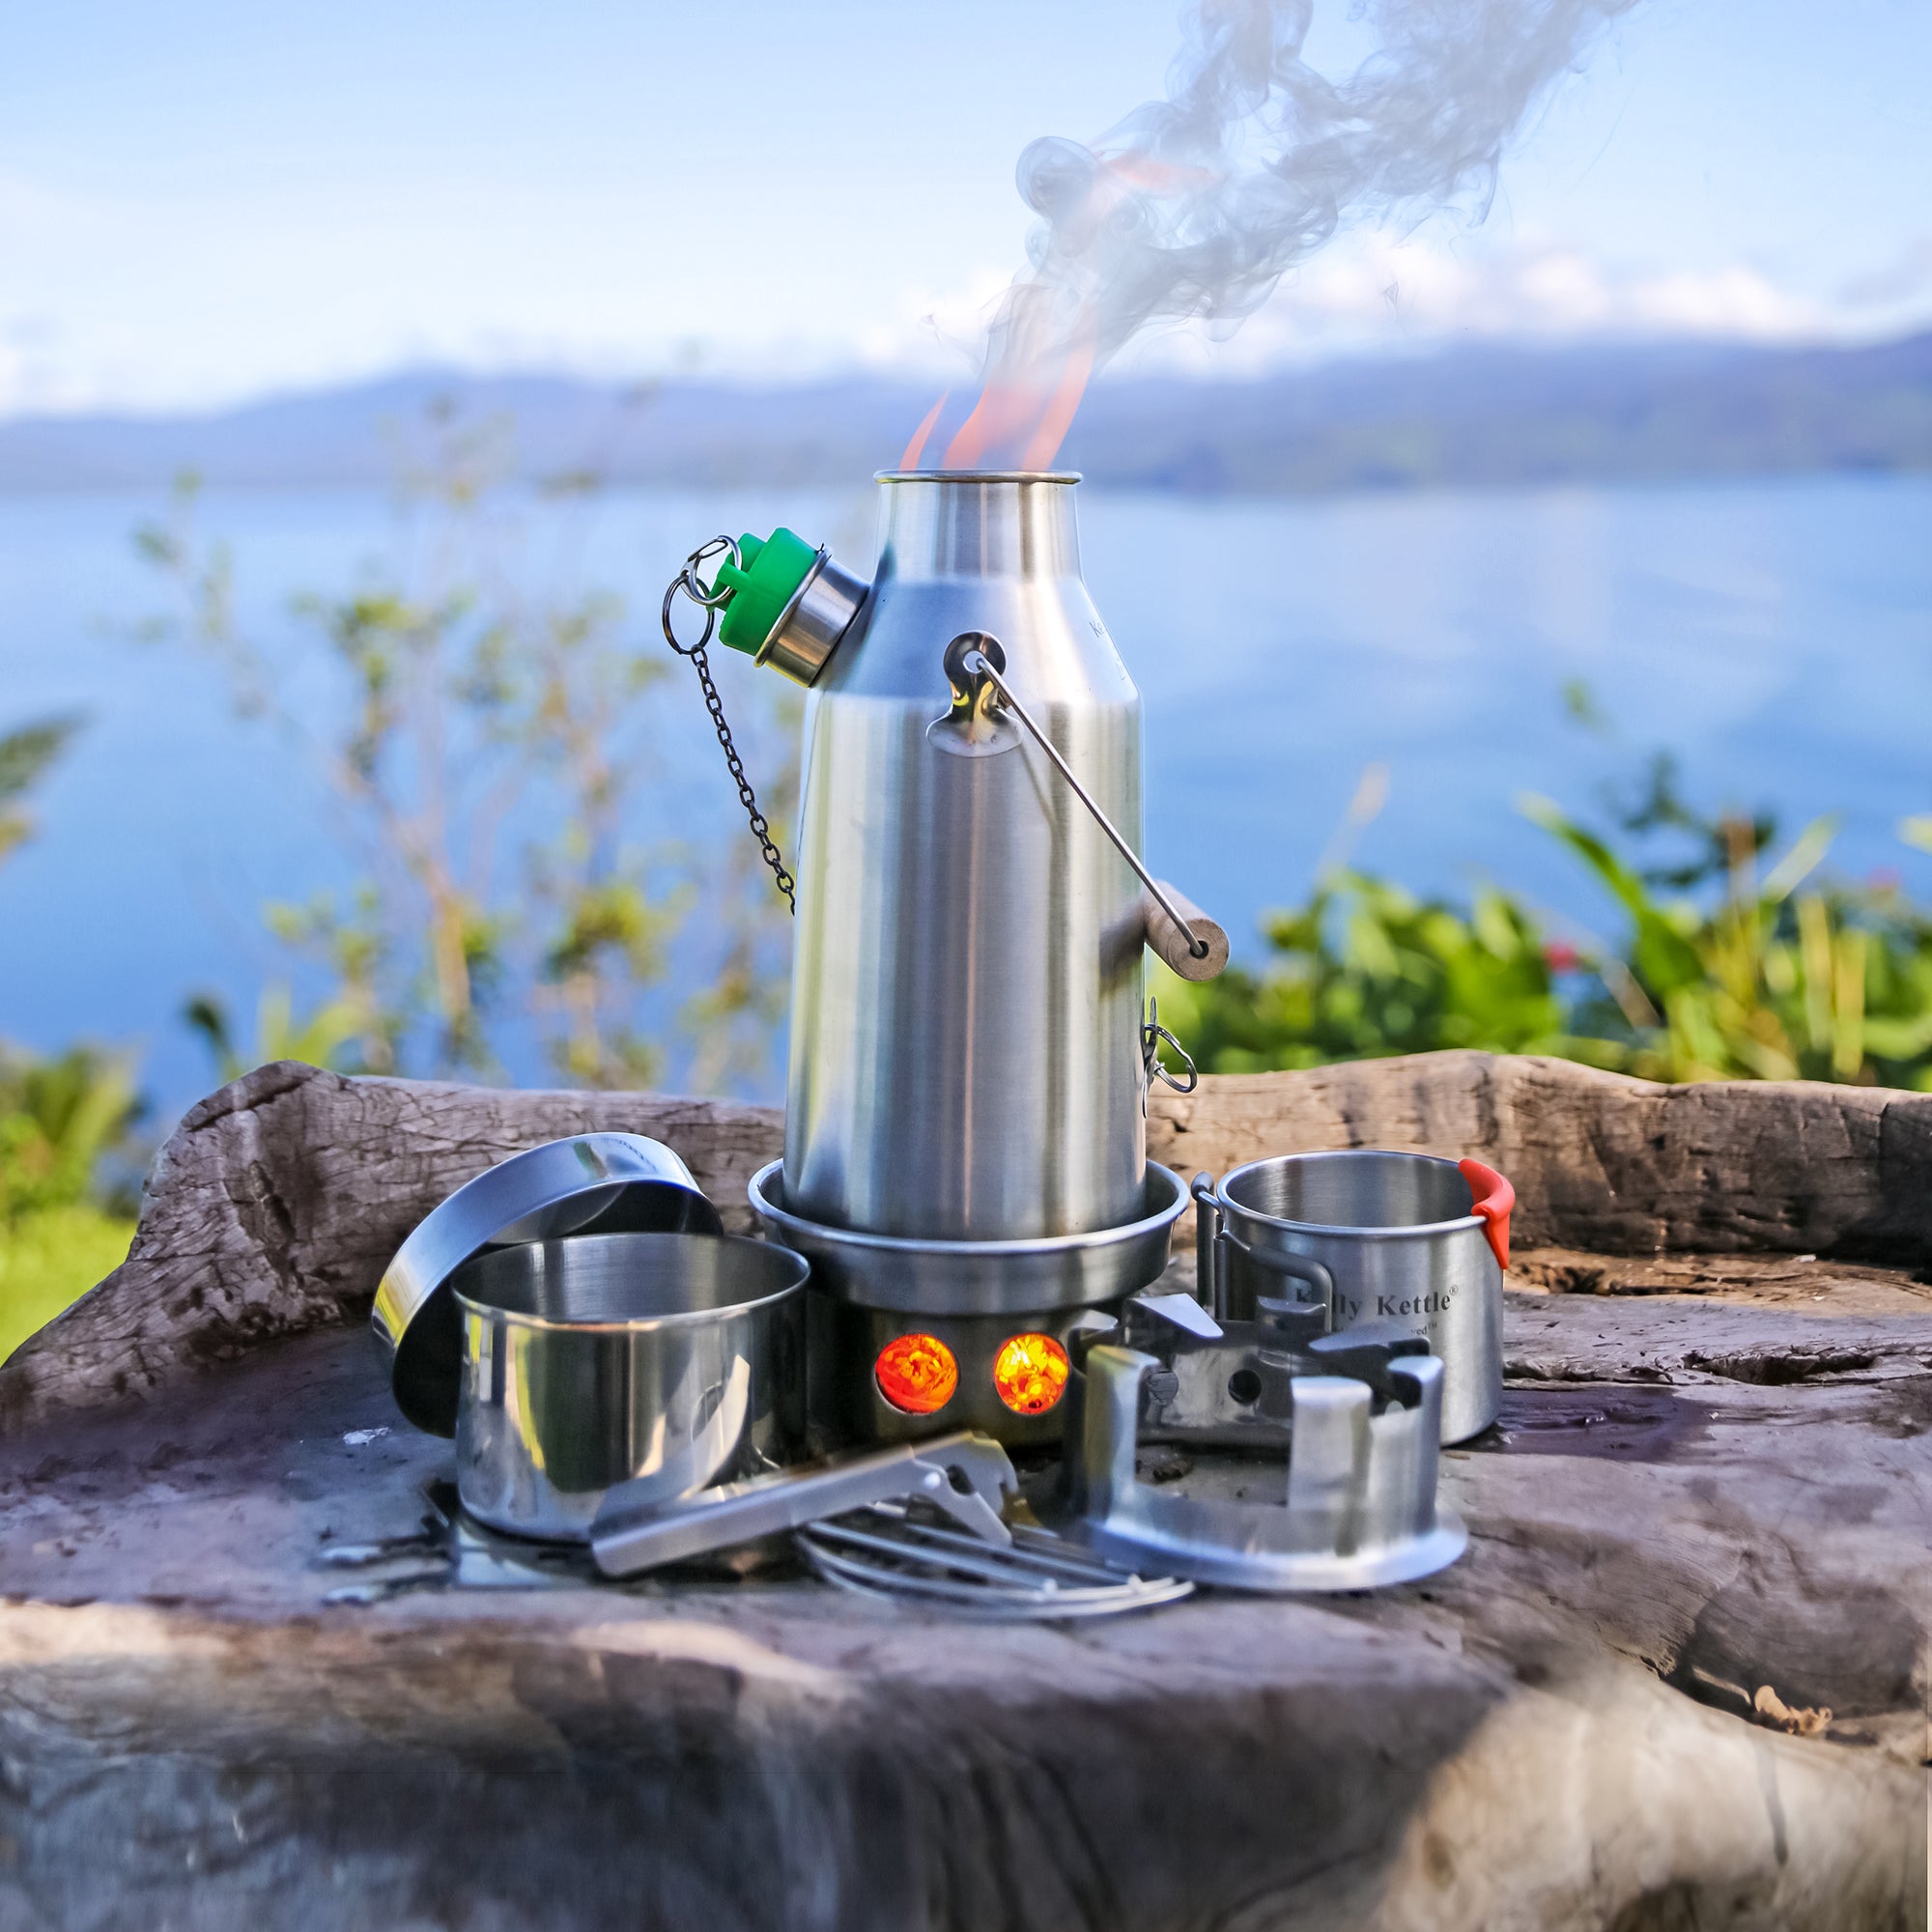 Medium 'Scout' Kettle - SST Camping Kettle & Stove, Camp Equipment, Camp  Cookware, Survival kit